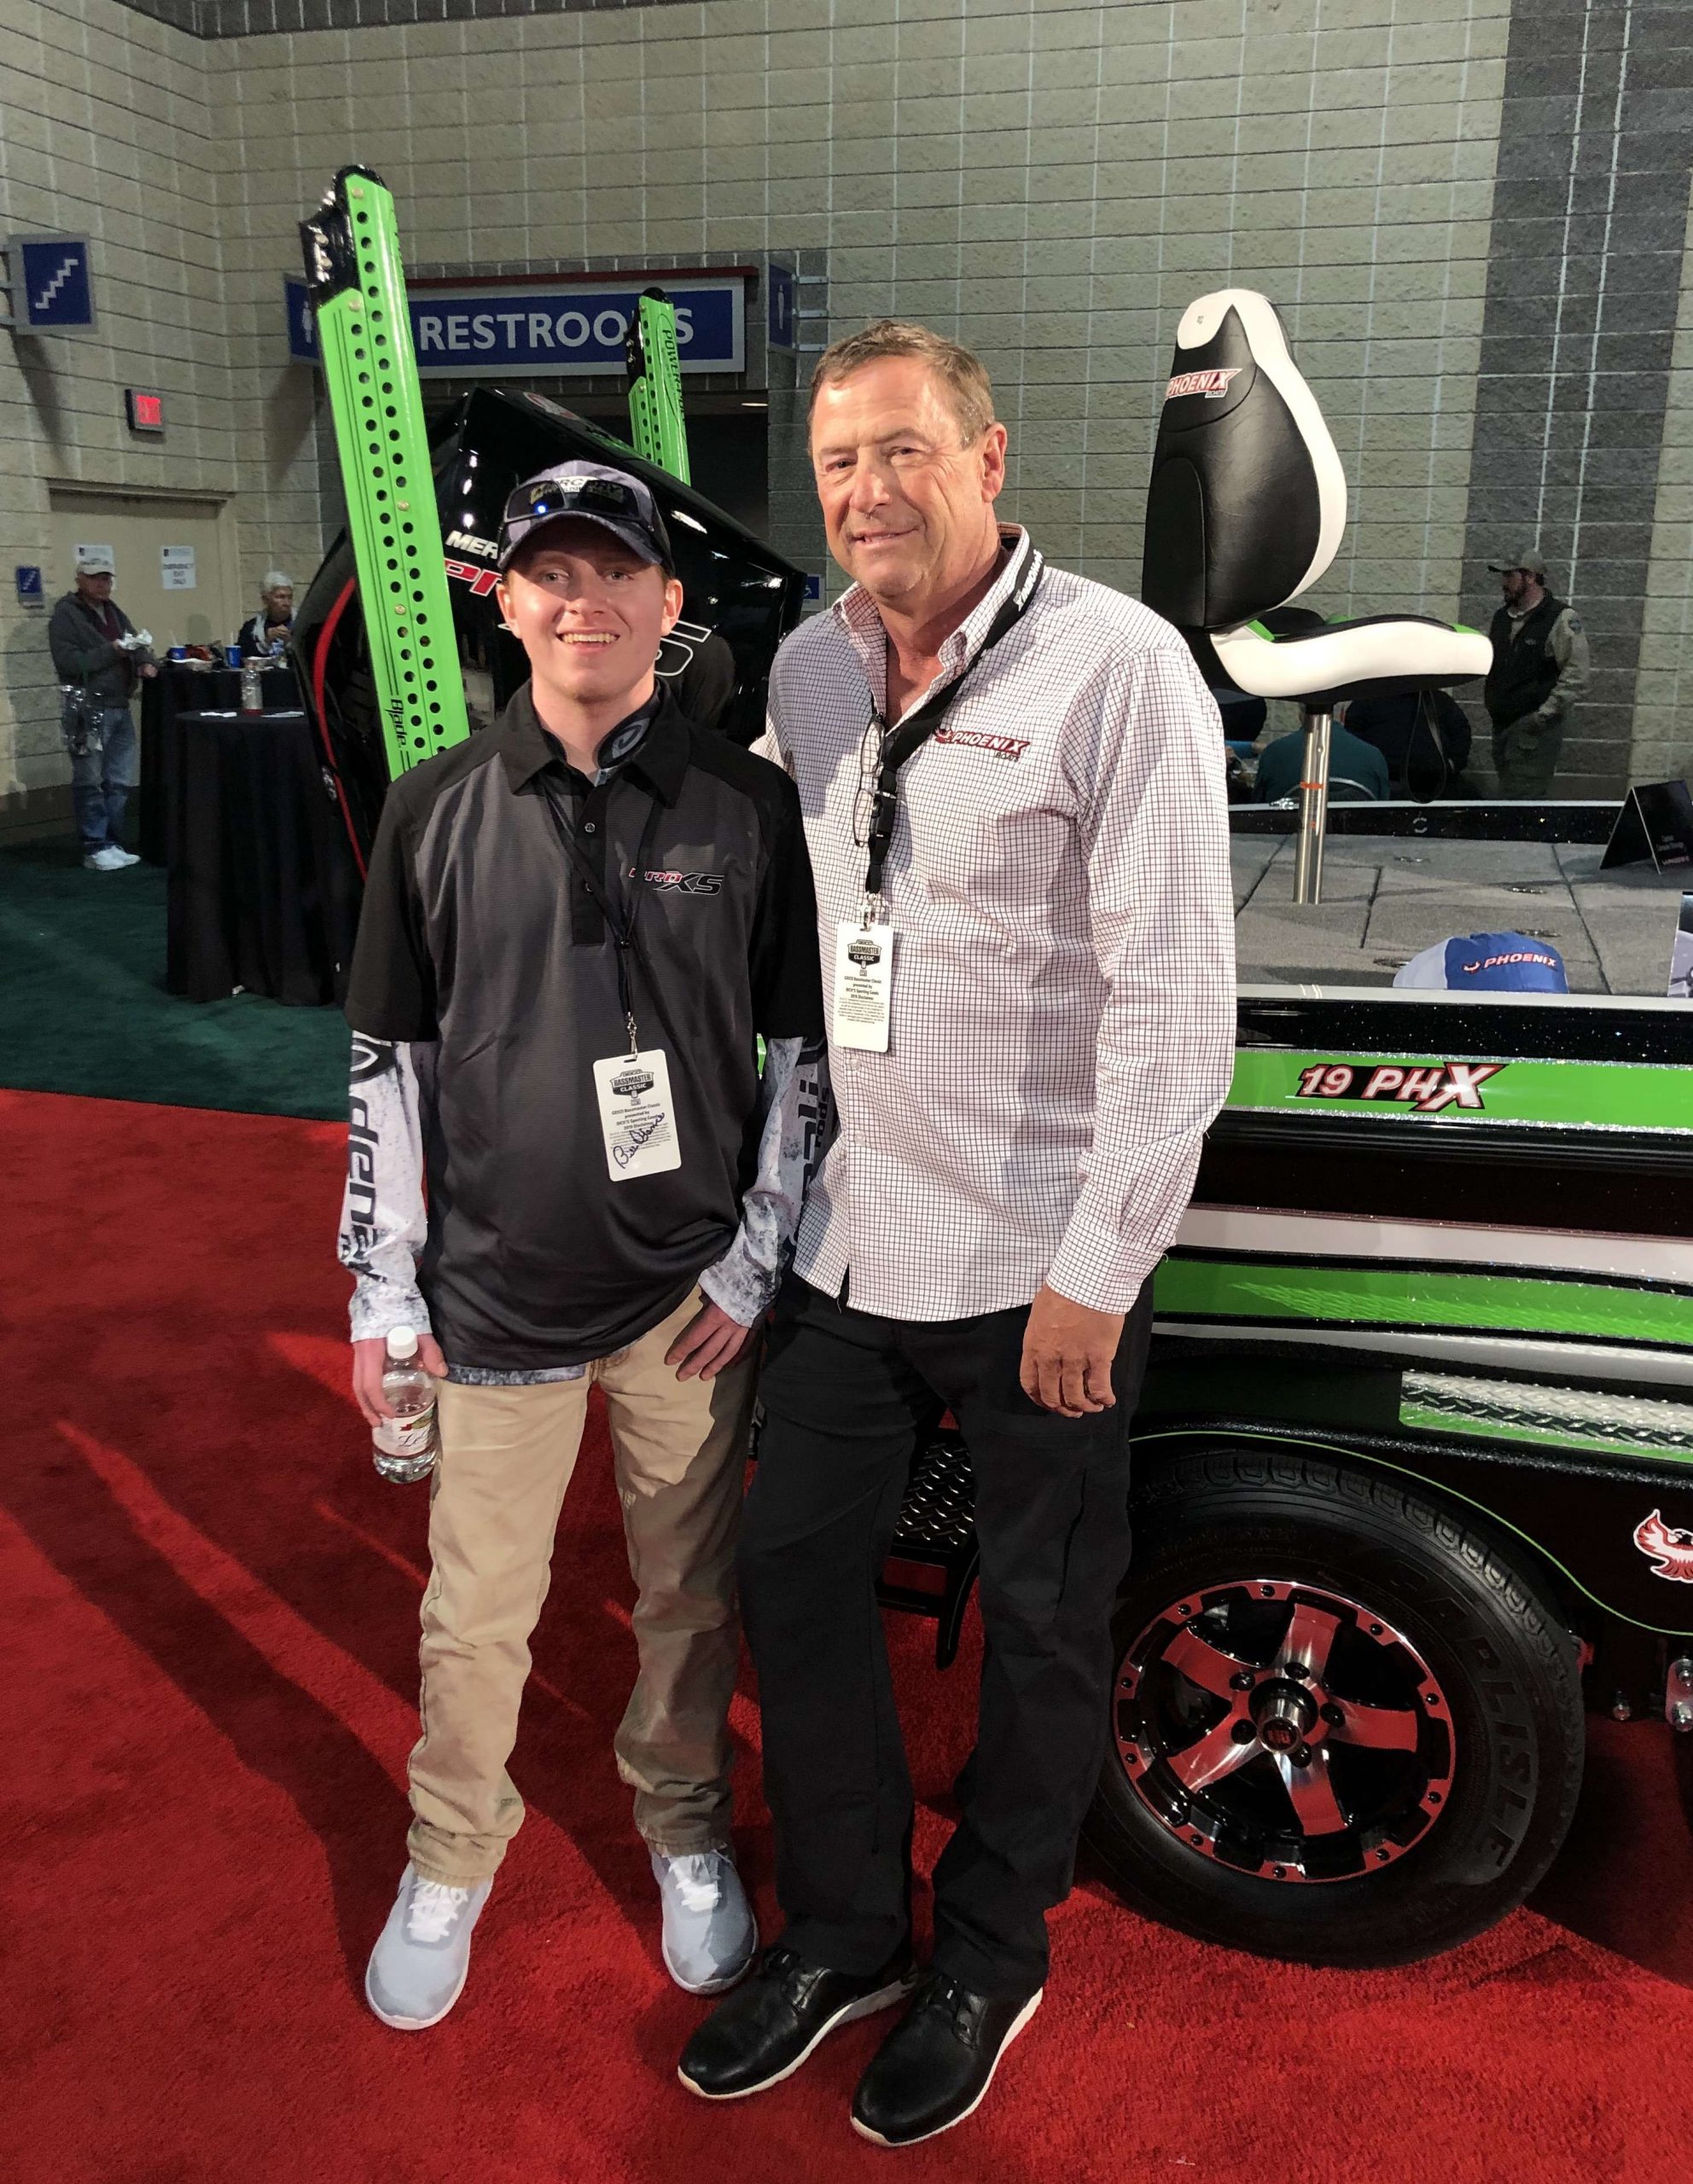 He met Bassmaster Elite Series pro Gary Clouse, who is also the President of Phoenix Boats.